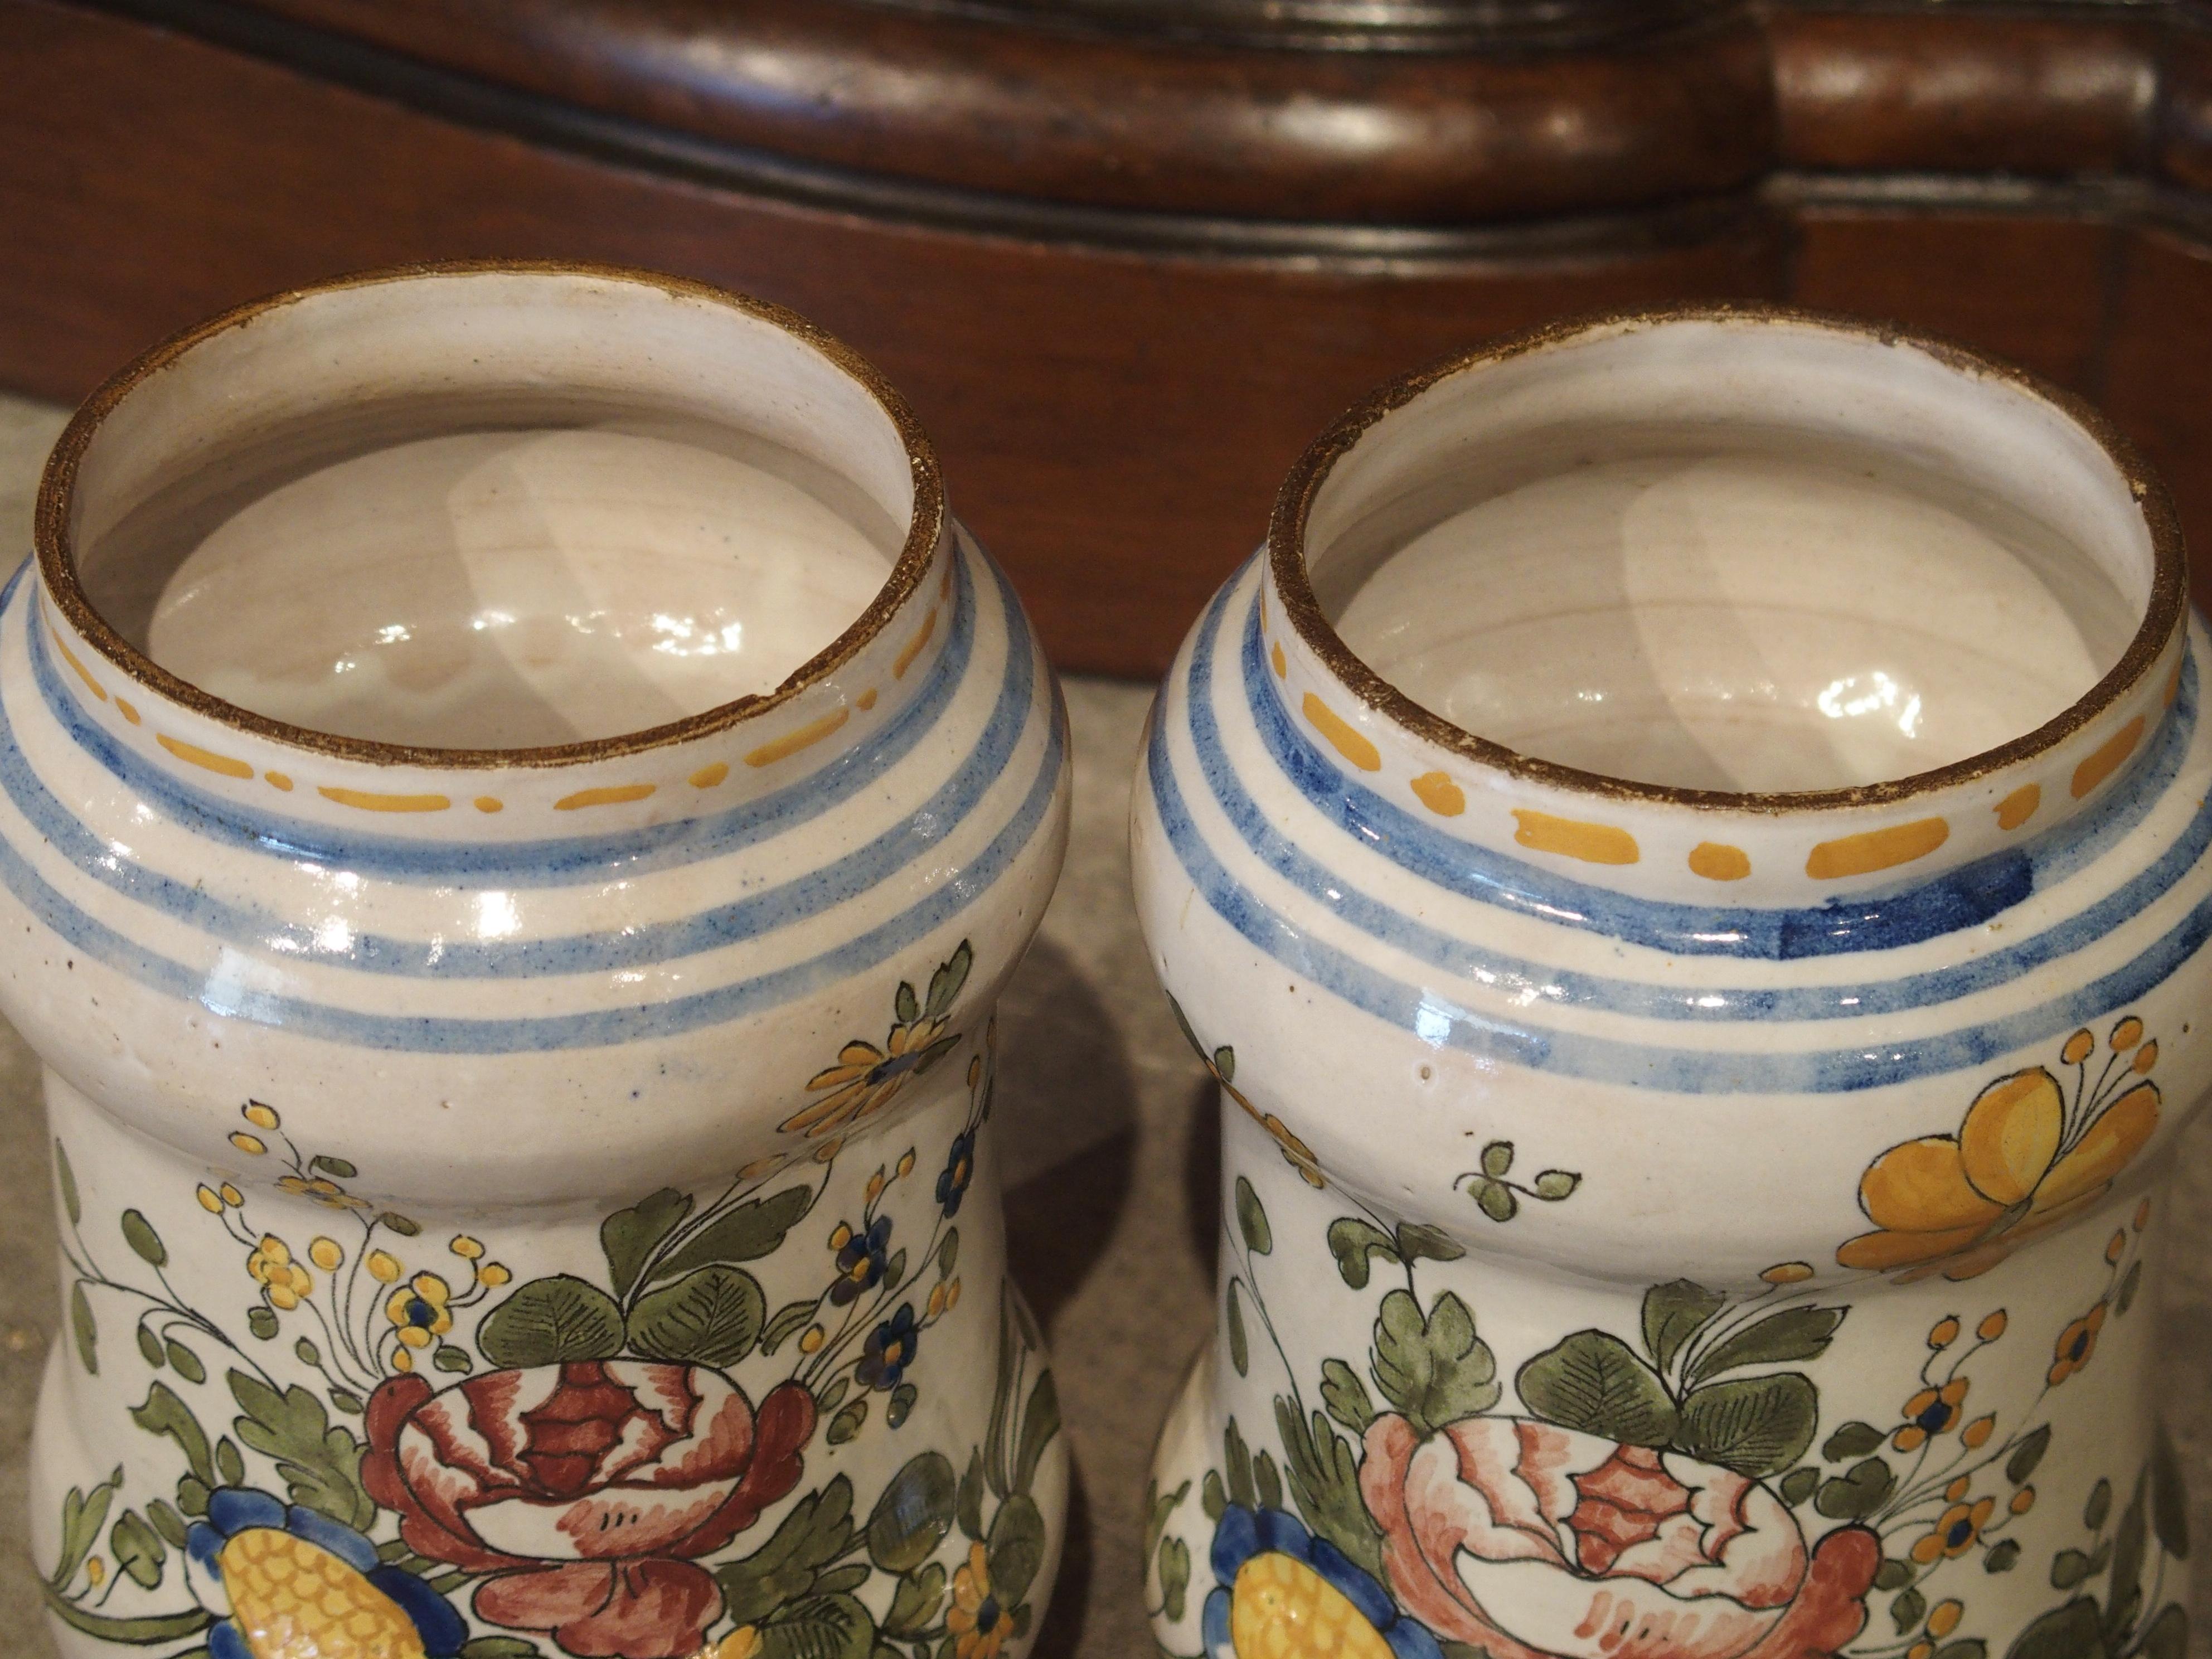 Hand-Painted Pair of Antique Albarello Apothecary Jars from Italy